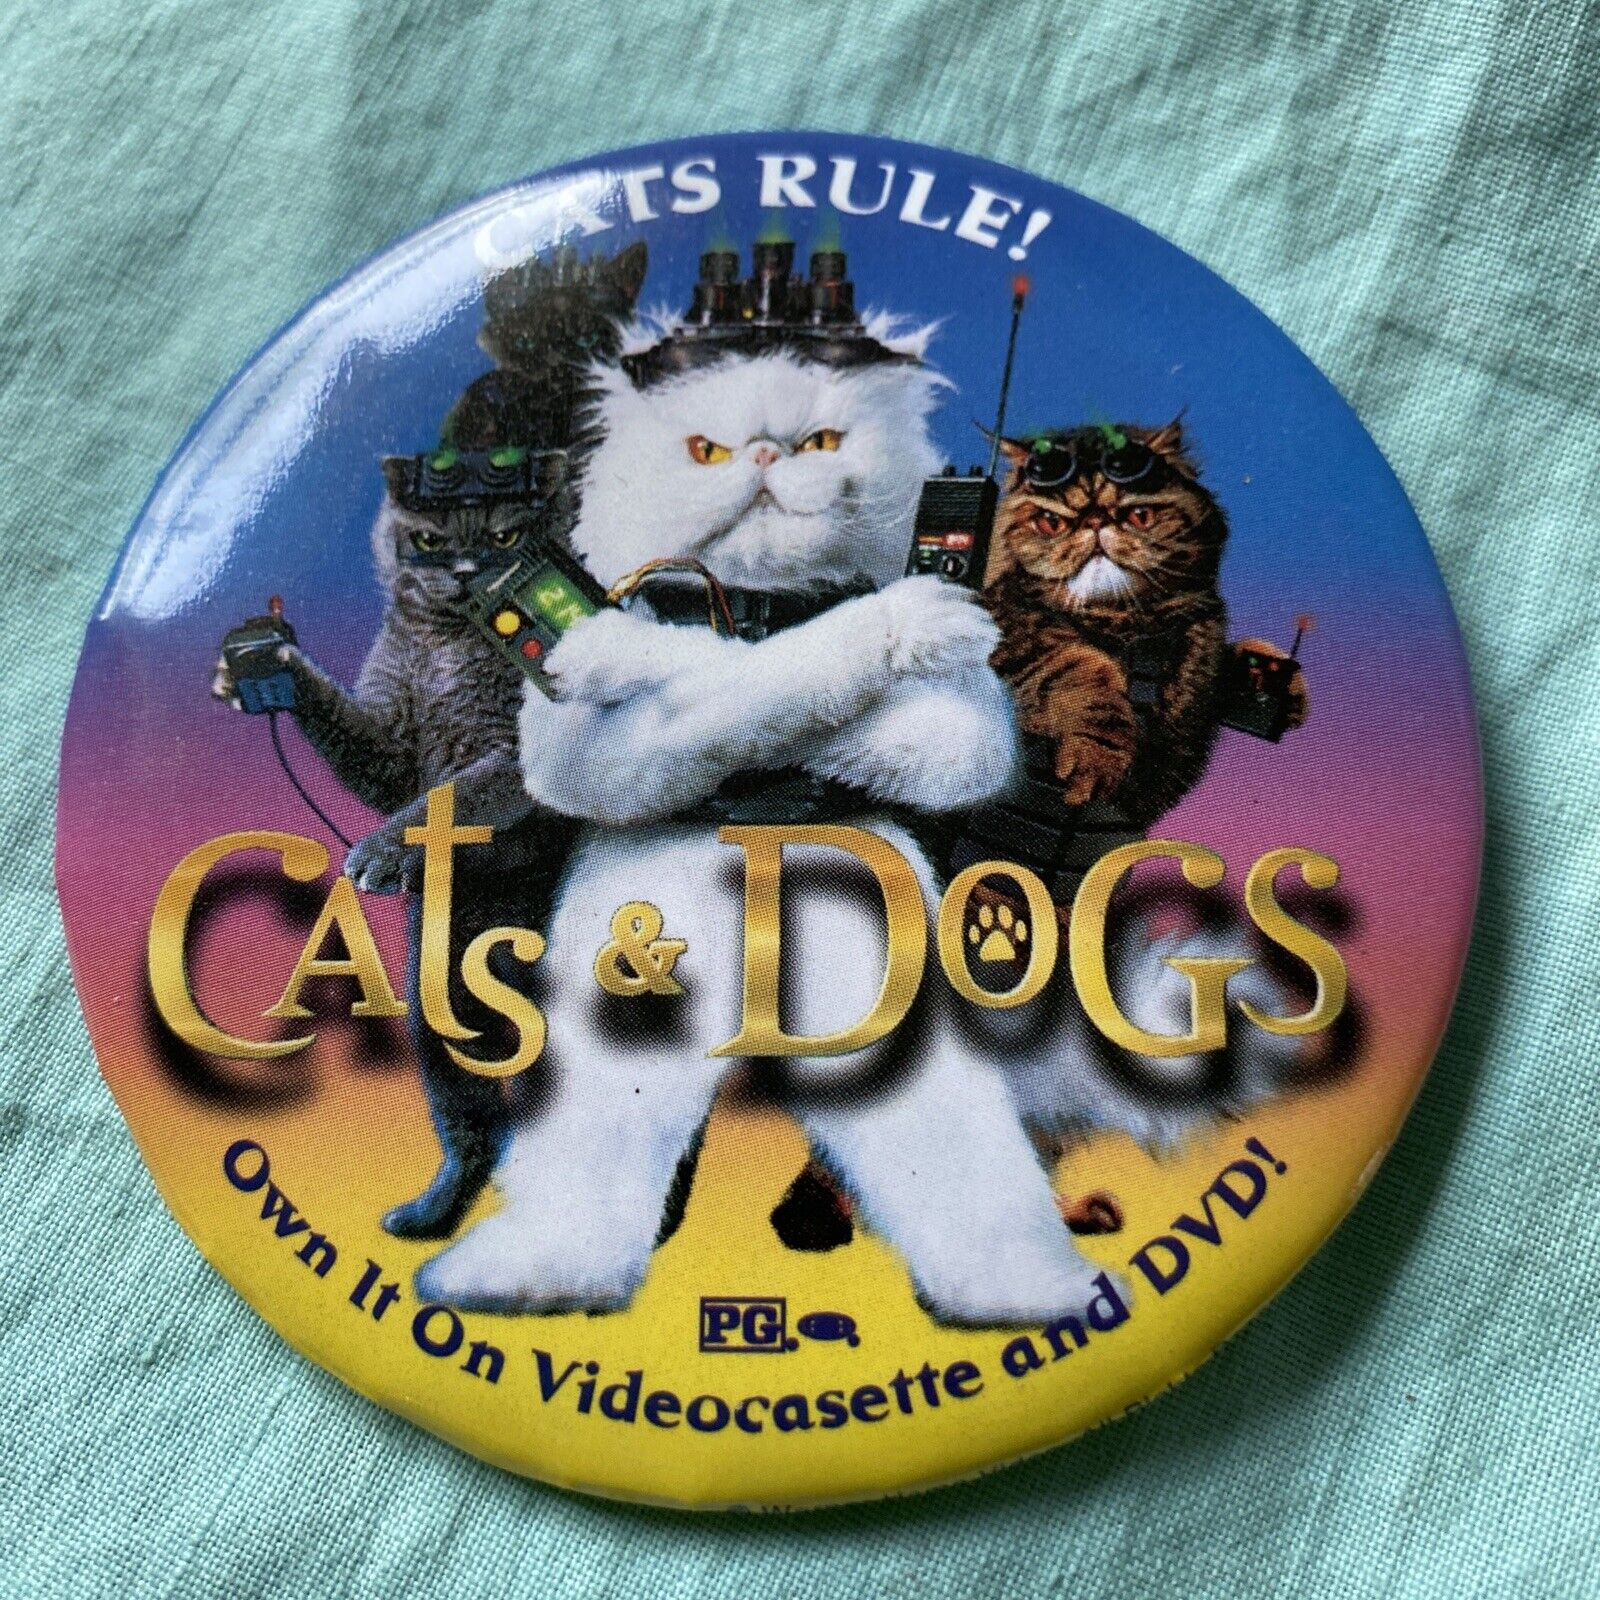 Cats & Dogs DVD Release Movie Collectible Button Pin Good Used Condition